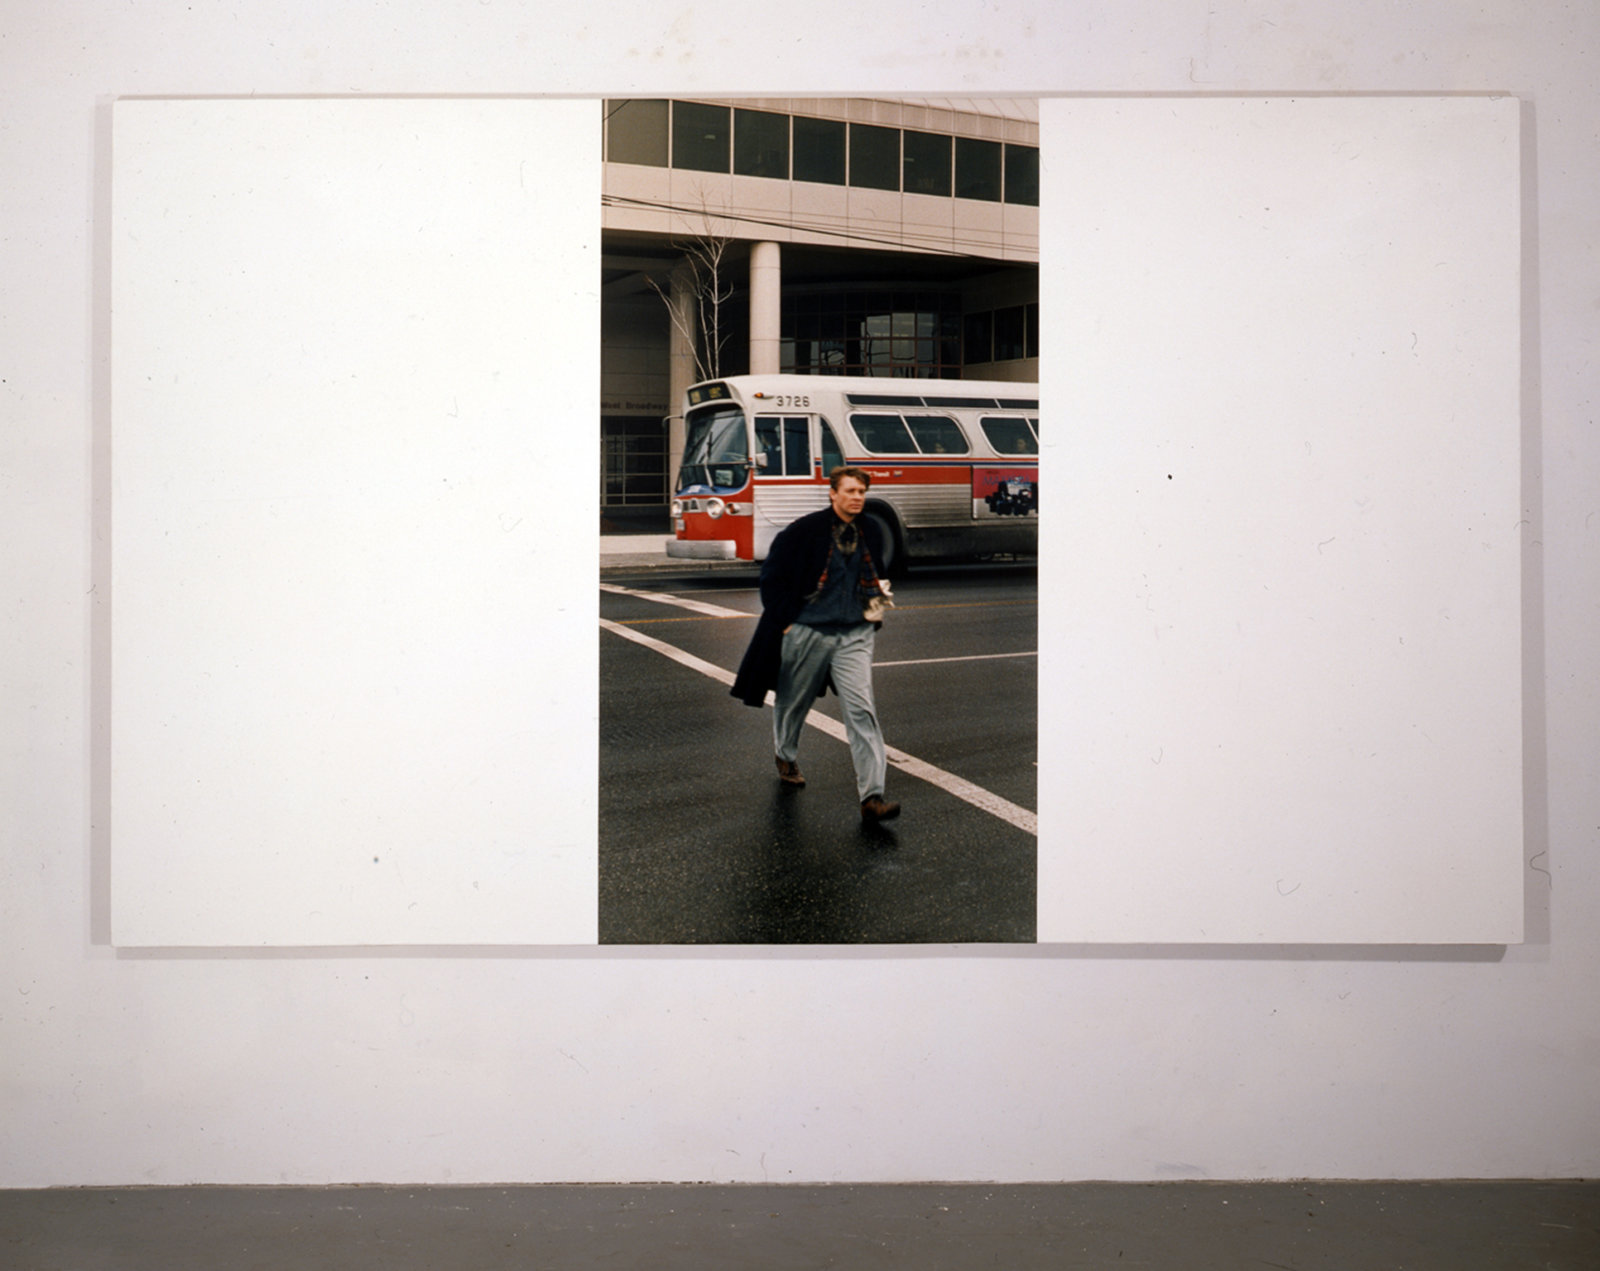 Ian Wallace, My Heroes in the Street IV (Keith), 1987, photolaminate and acrylic on linen, 72 x 120 in. (183 x 305 cm)